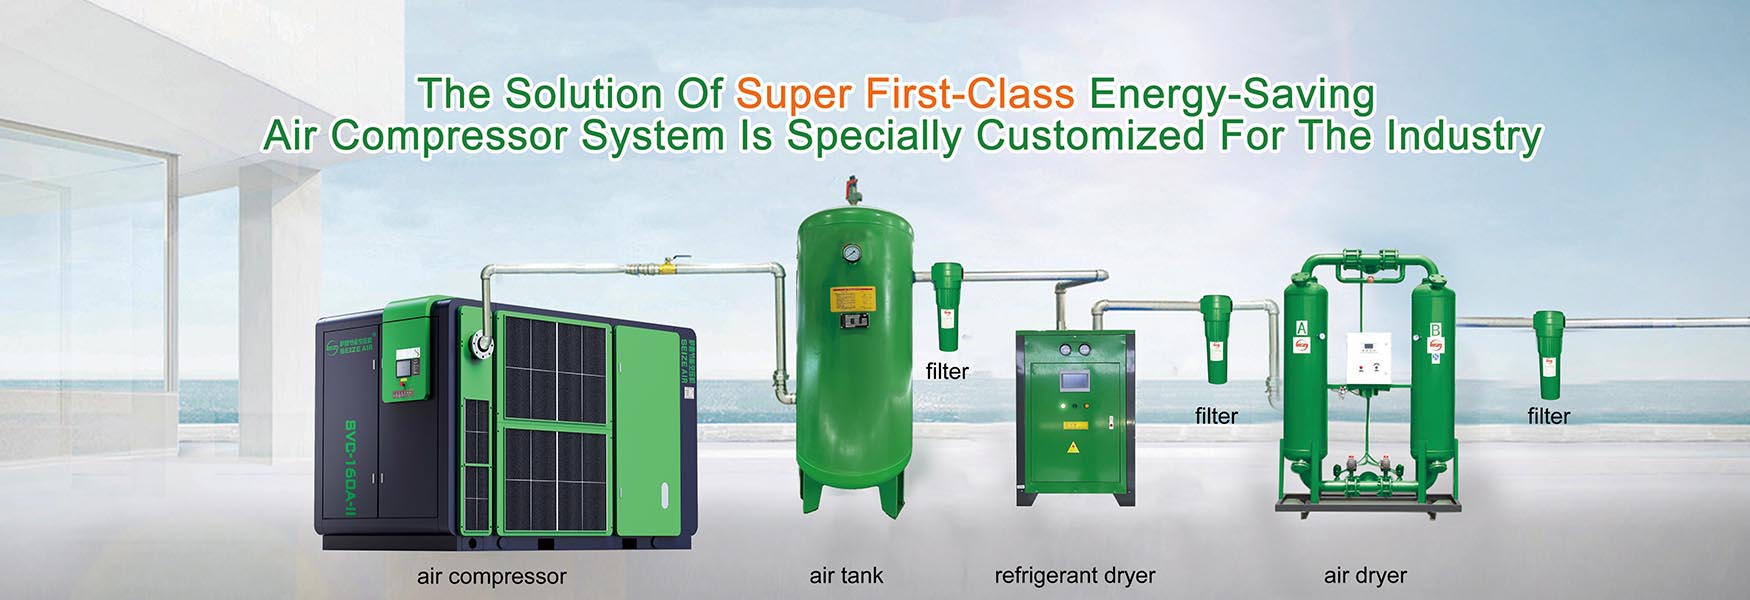 Dryer and filter equipment